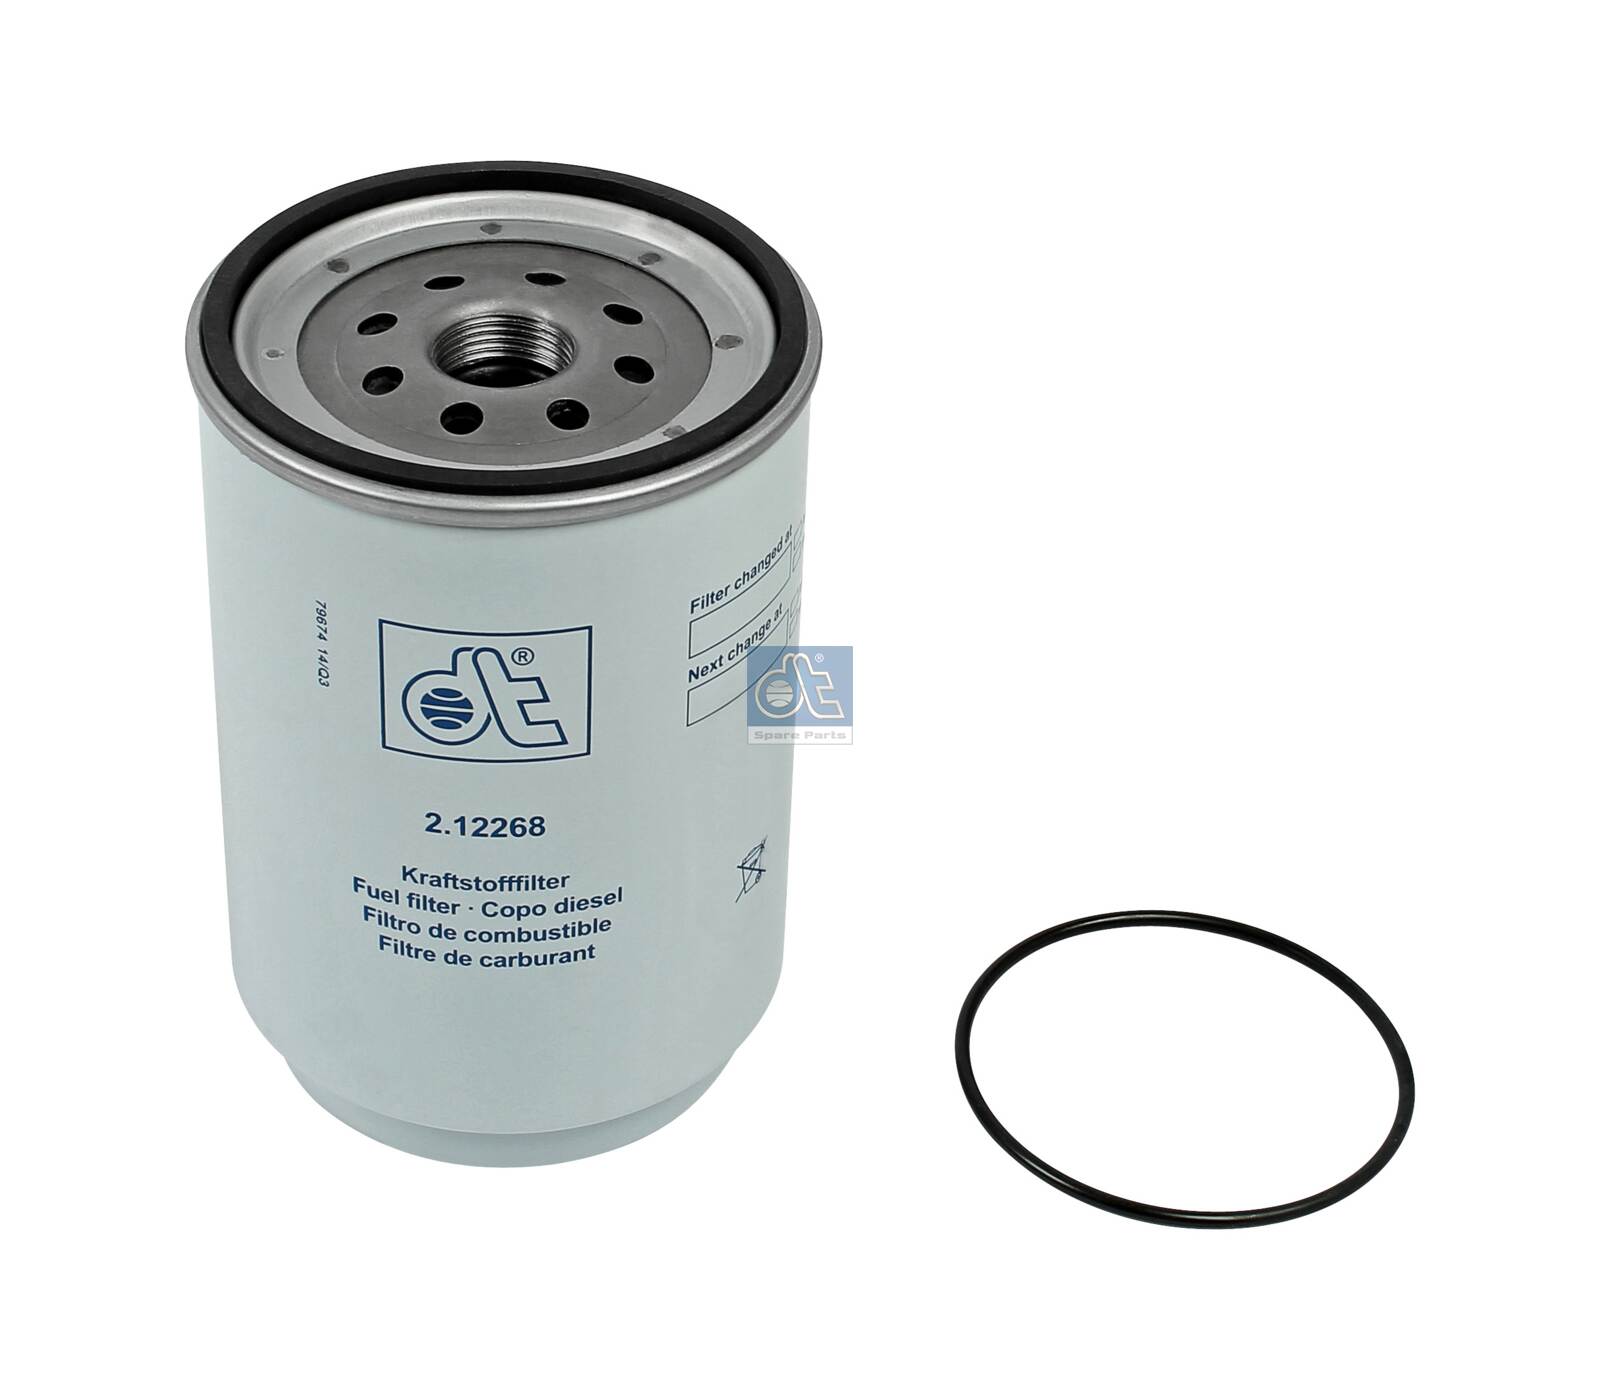 2.12268, Fuel Filter, DT Spare Parts, 1526297, 20539578, 20745605, 5001868493, 1533870, 20788794, 21041613, 7420745605, 1535381, 20869725, 21380524, 7420998349, 20879812, 21380526, 7421380483, 20998349, 21017307, 21366596, 21380483, 21380488, 03.14.028, 033.452, 16-343230006, 24.146.00, 35342, 50014194, 70537610, 70537611, 78946, F026402132